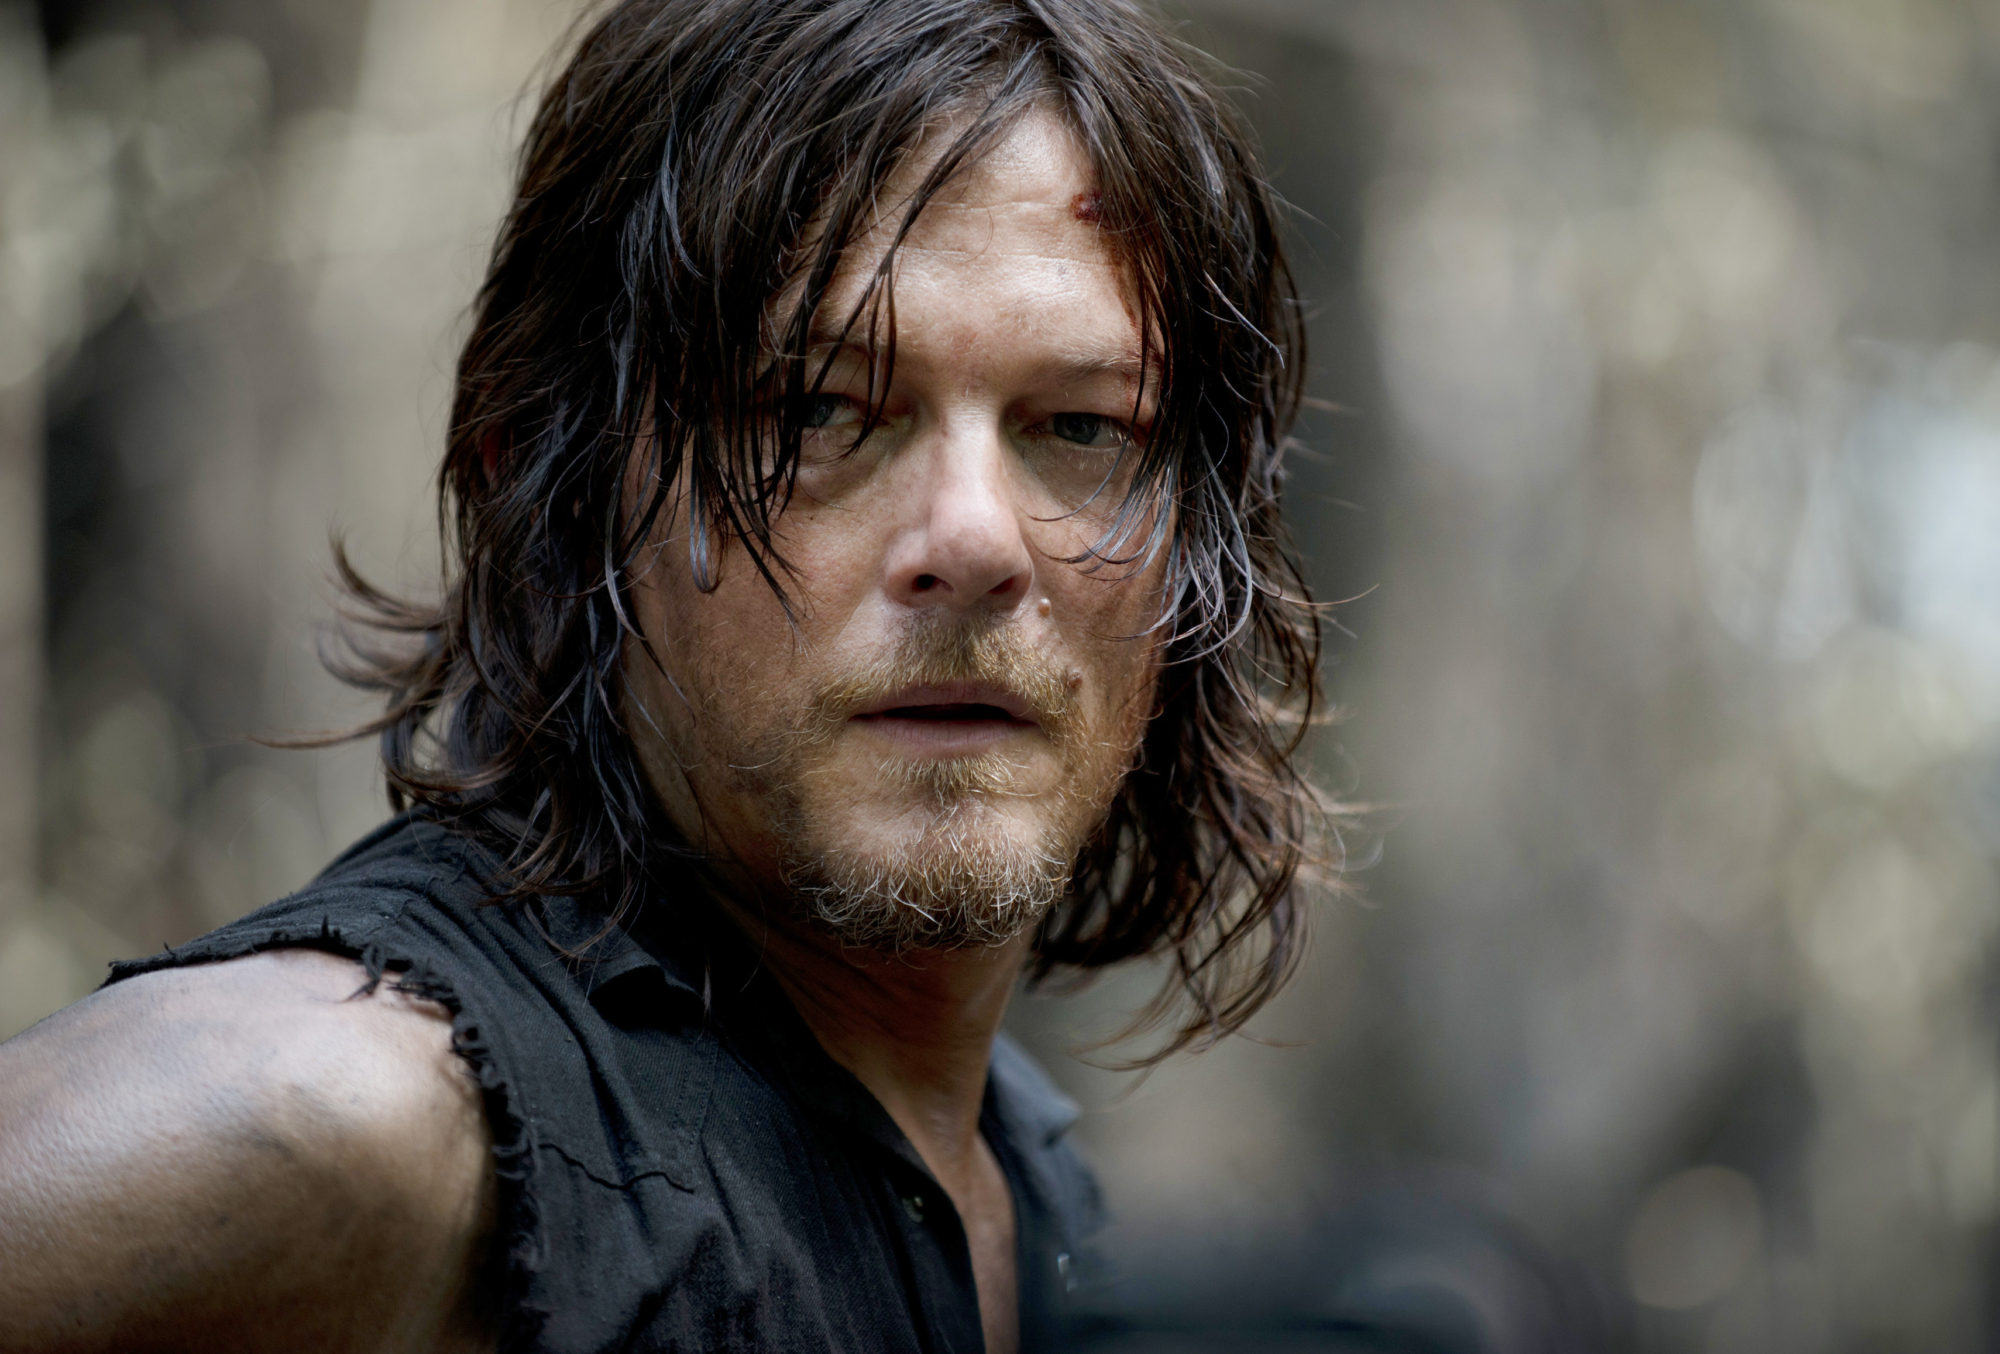 Norman Reedus Spinoff Series Finds a Showrunner - "The Walking Dead"